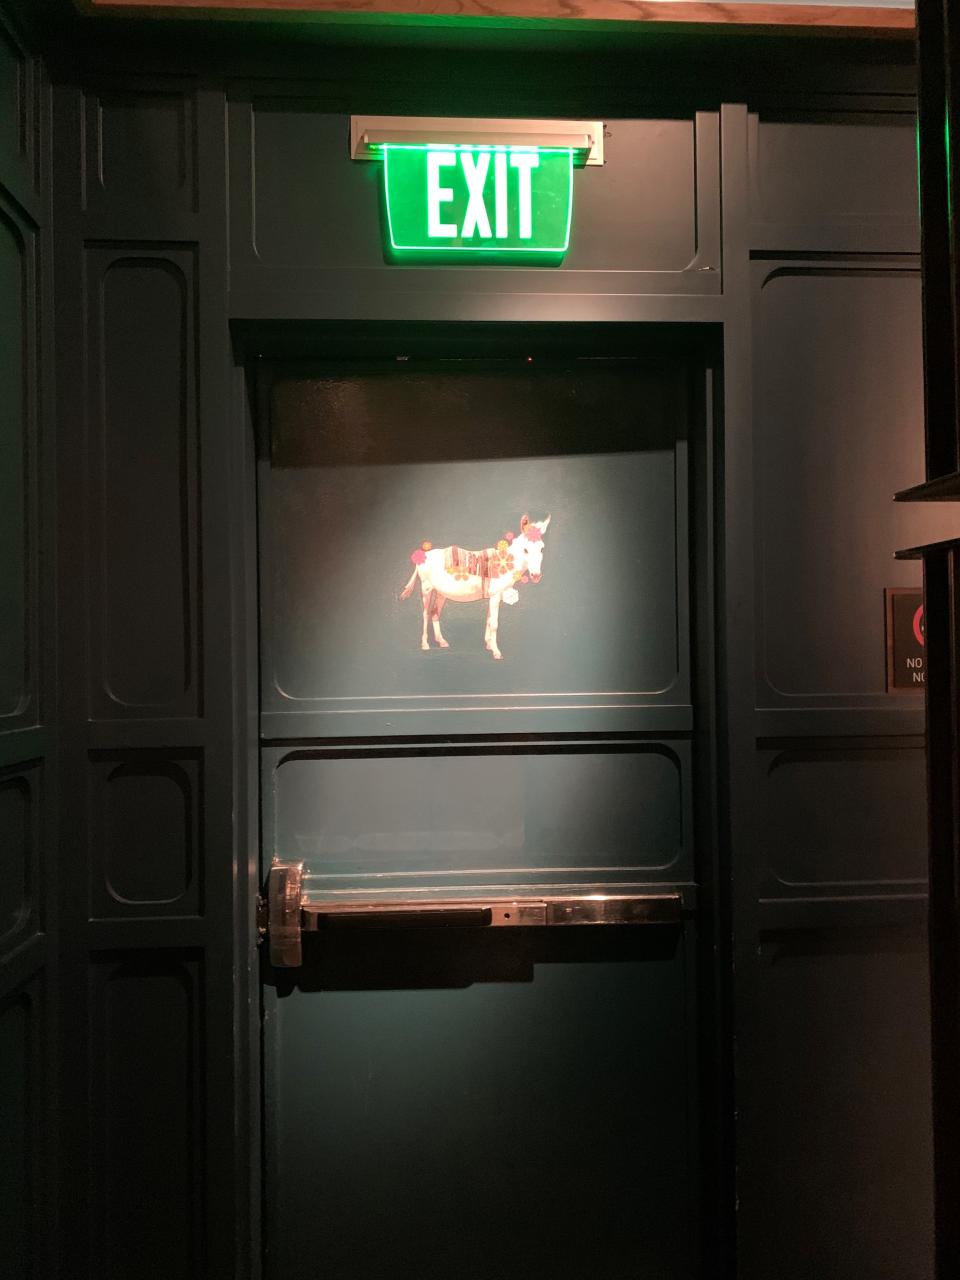 At the Nevada location, Ghost Donkey is hidden behind a food court in the Cosmopolitan of Las Vegas hotel and casino.